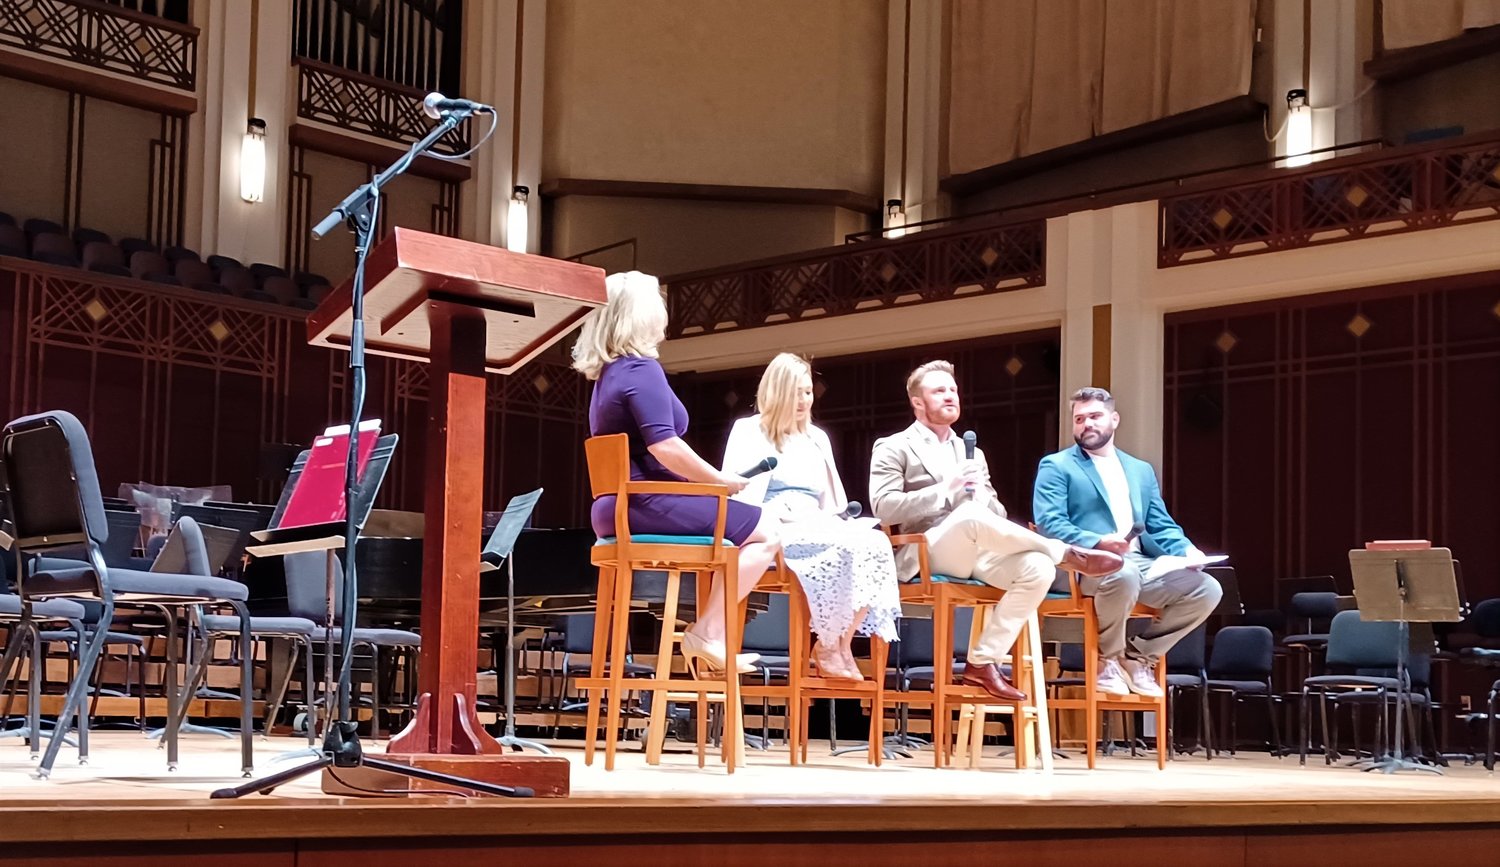 Jacksonville Symphony music director Courtney Lewis participates in a Q&A session Sept. 27 during a private reception at Jacoby Symphony Hall. From left are moderator Melissa Ross, concertmaster Adelya Nartadjieva, Lewis and associate conductor Kevin Fitzgerald.